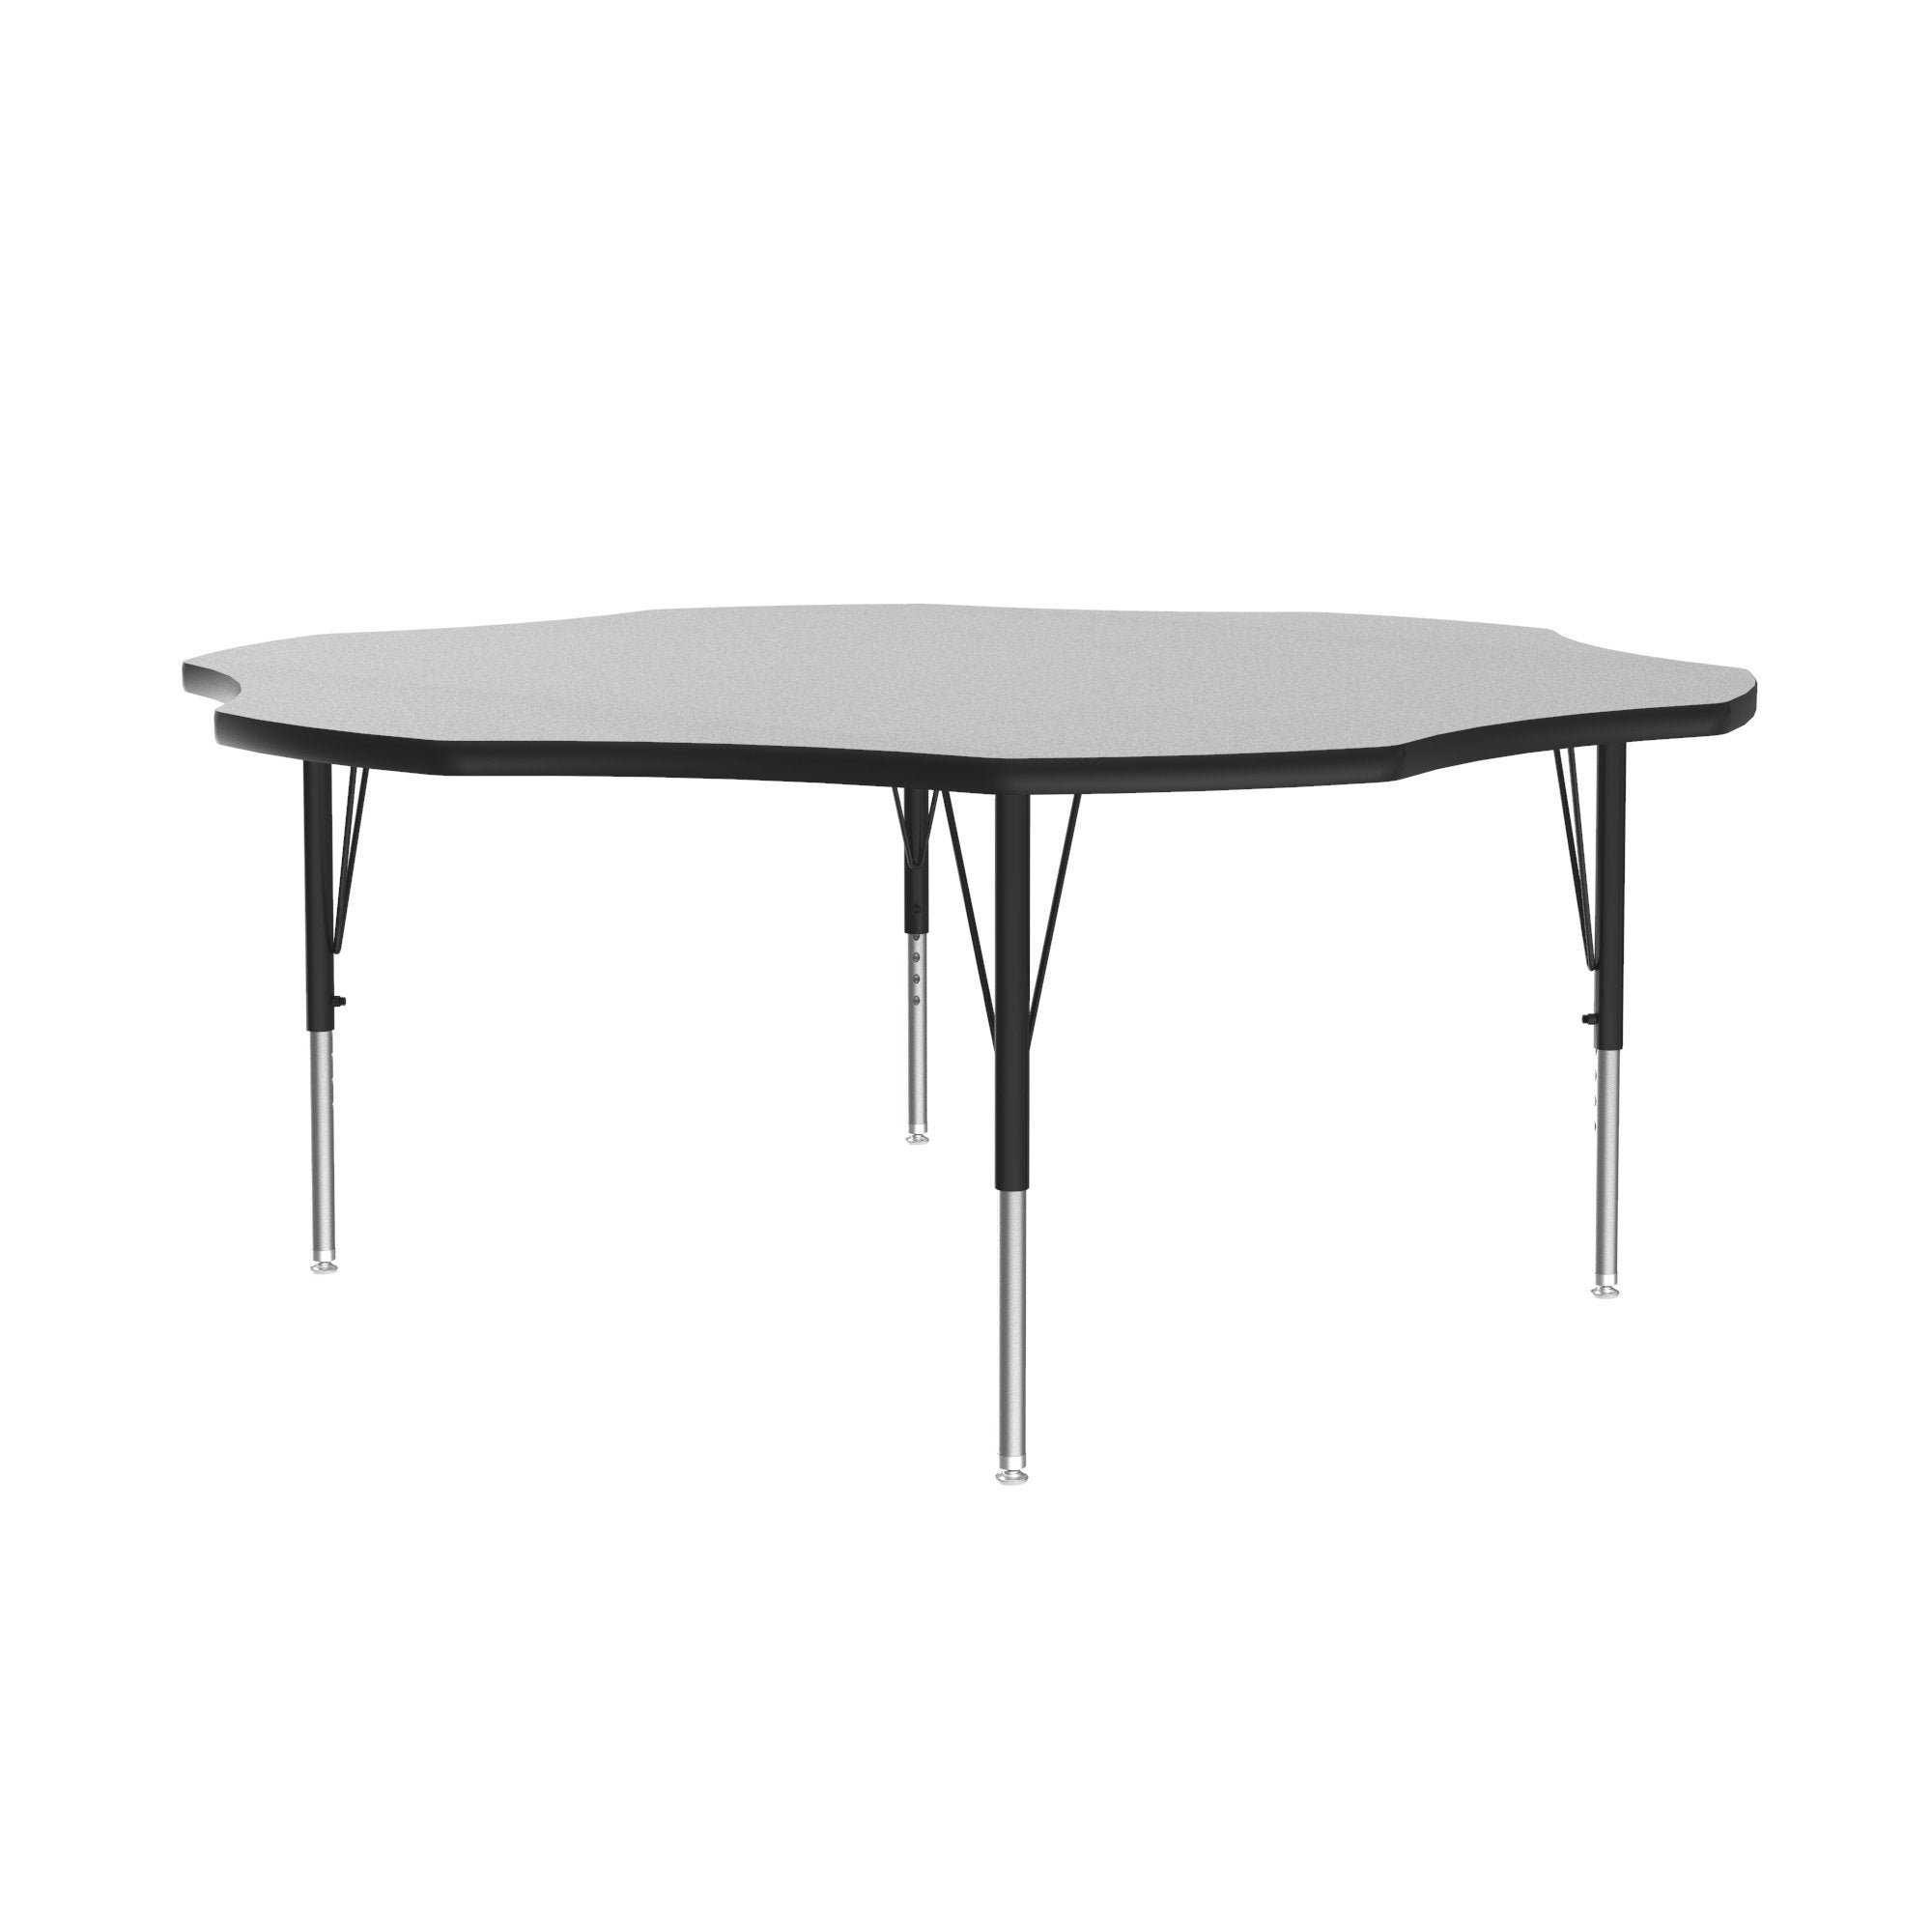  Correll 60x66 Horseshoe Shaped Classroom Activity Table,  Height Adjustable (19-29) Colonial Hickory Top & Edge, Durable High  Pressure Laminate, Black/Chrome Base, School Furniture, Made in The USA :  Office Products